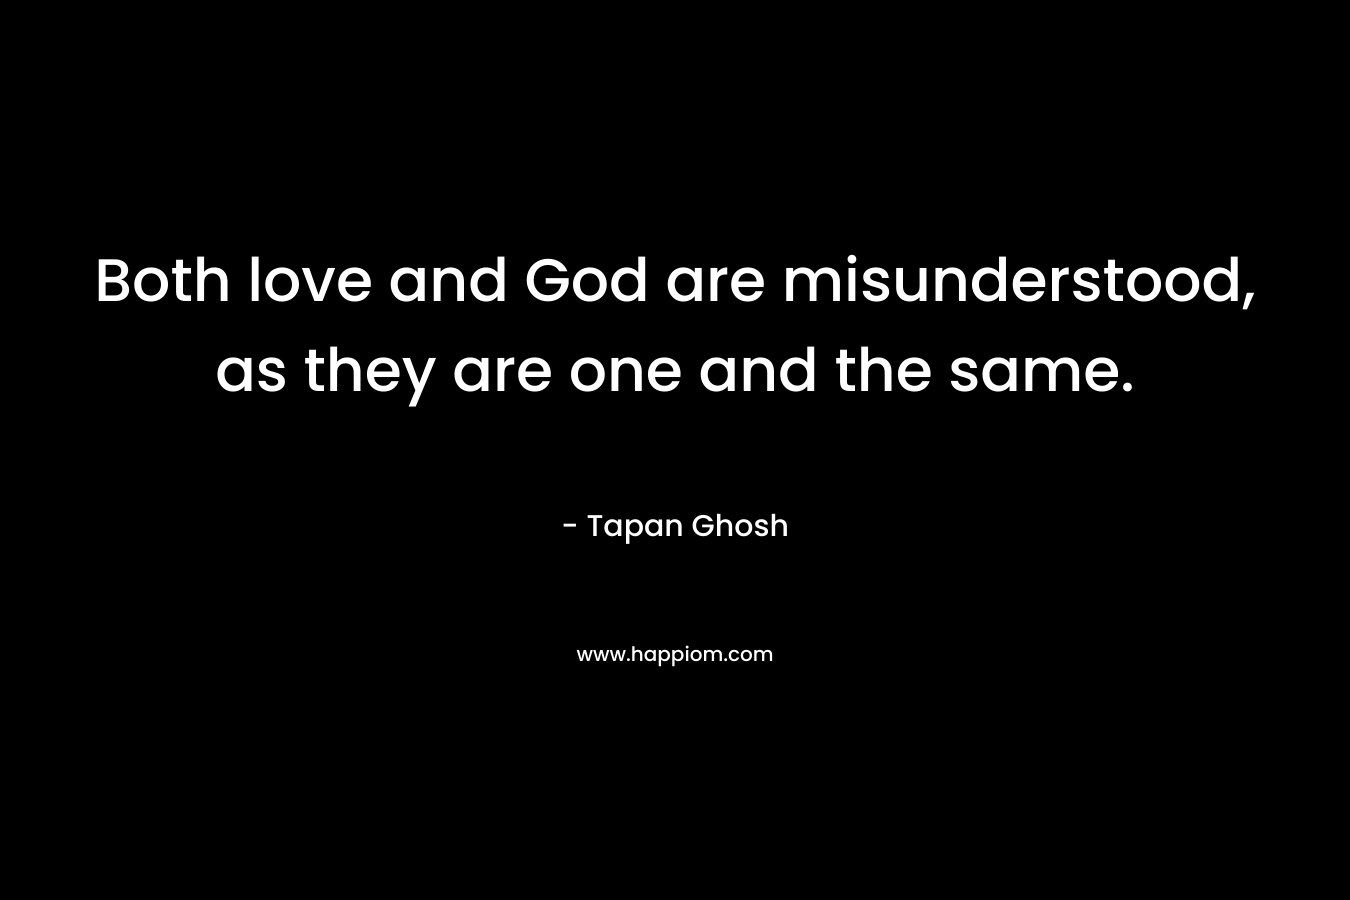 Both love and God are misunderstood, as they are one and the same.